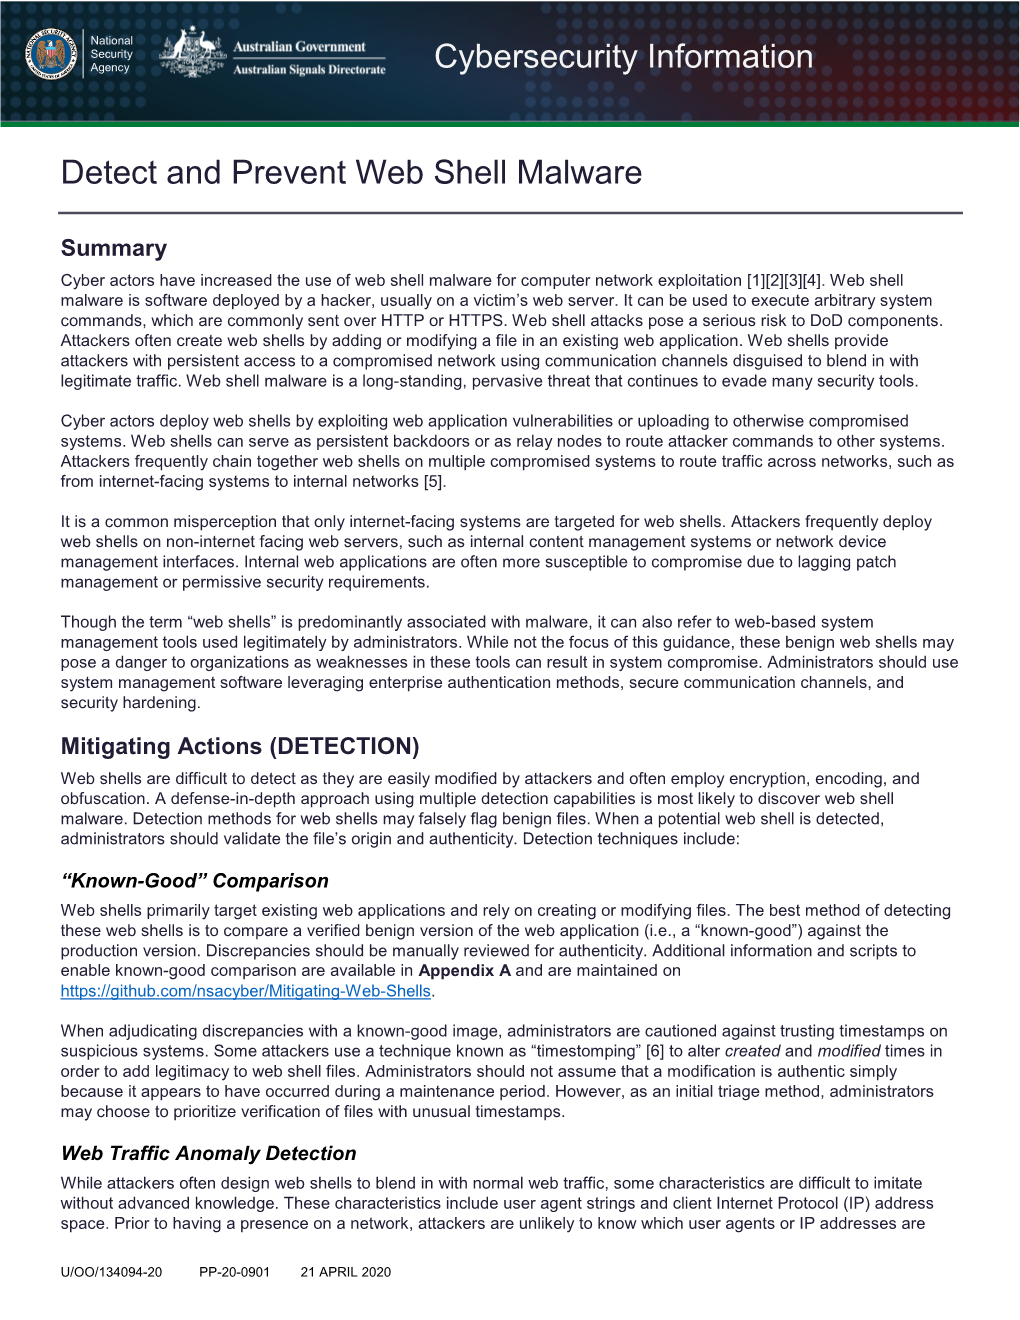 Cybersecurity Information Detect and Prevent Web Shell Malware